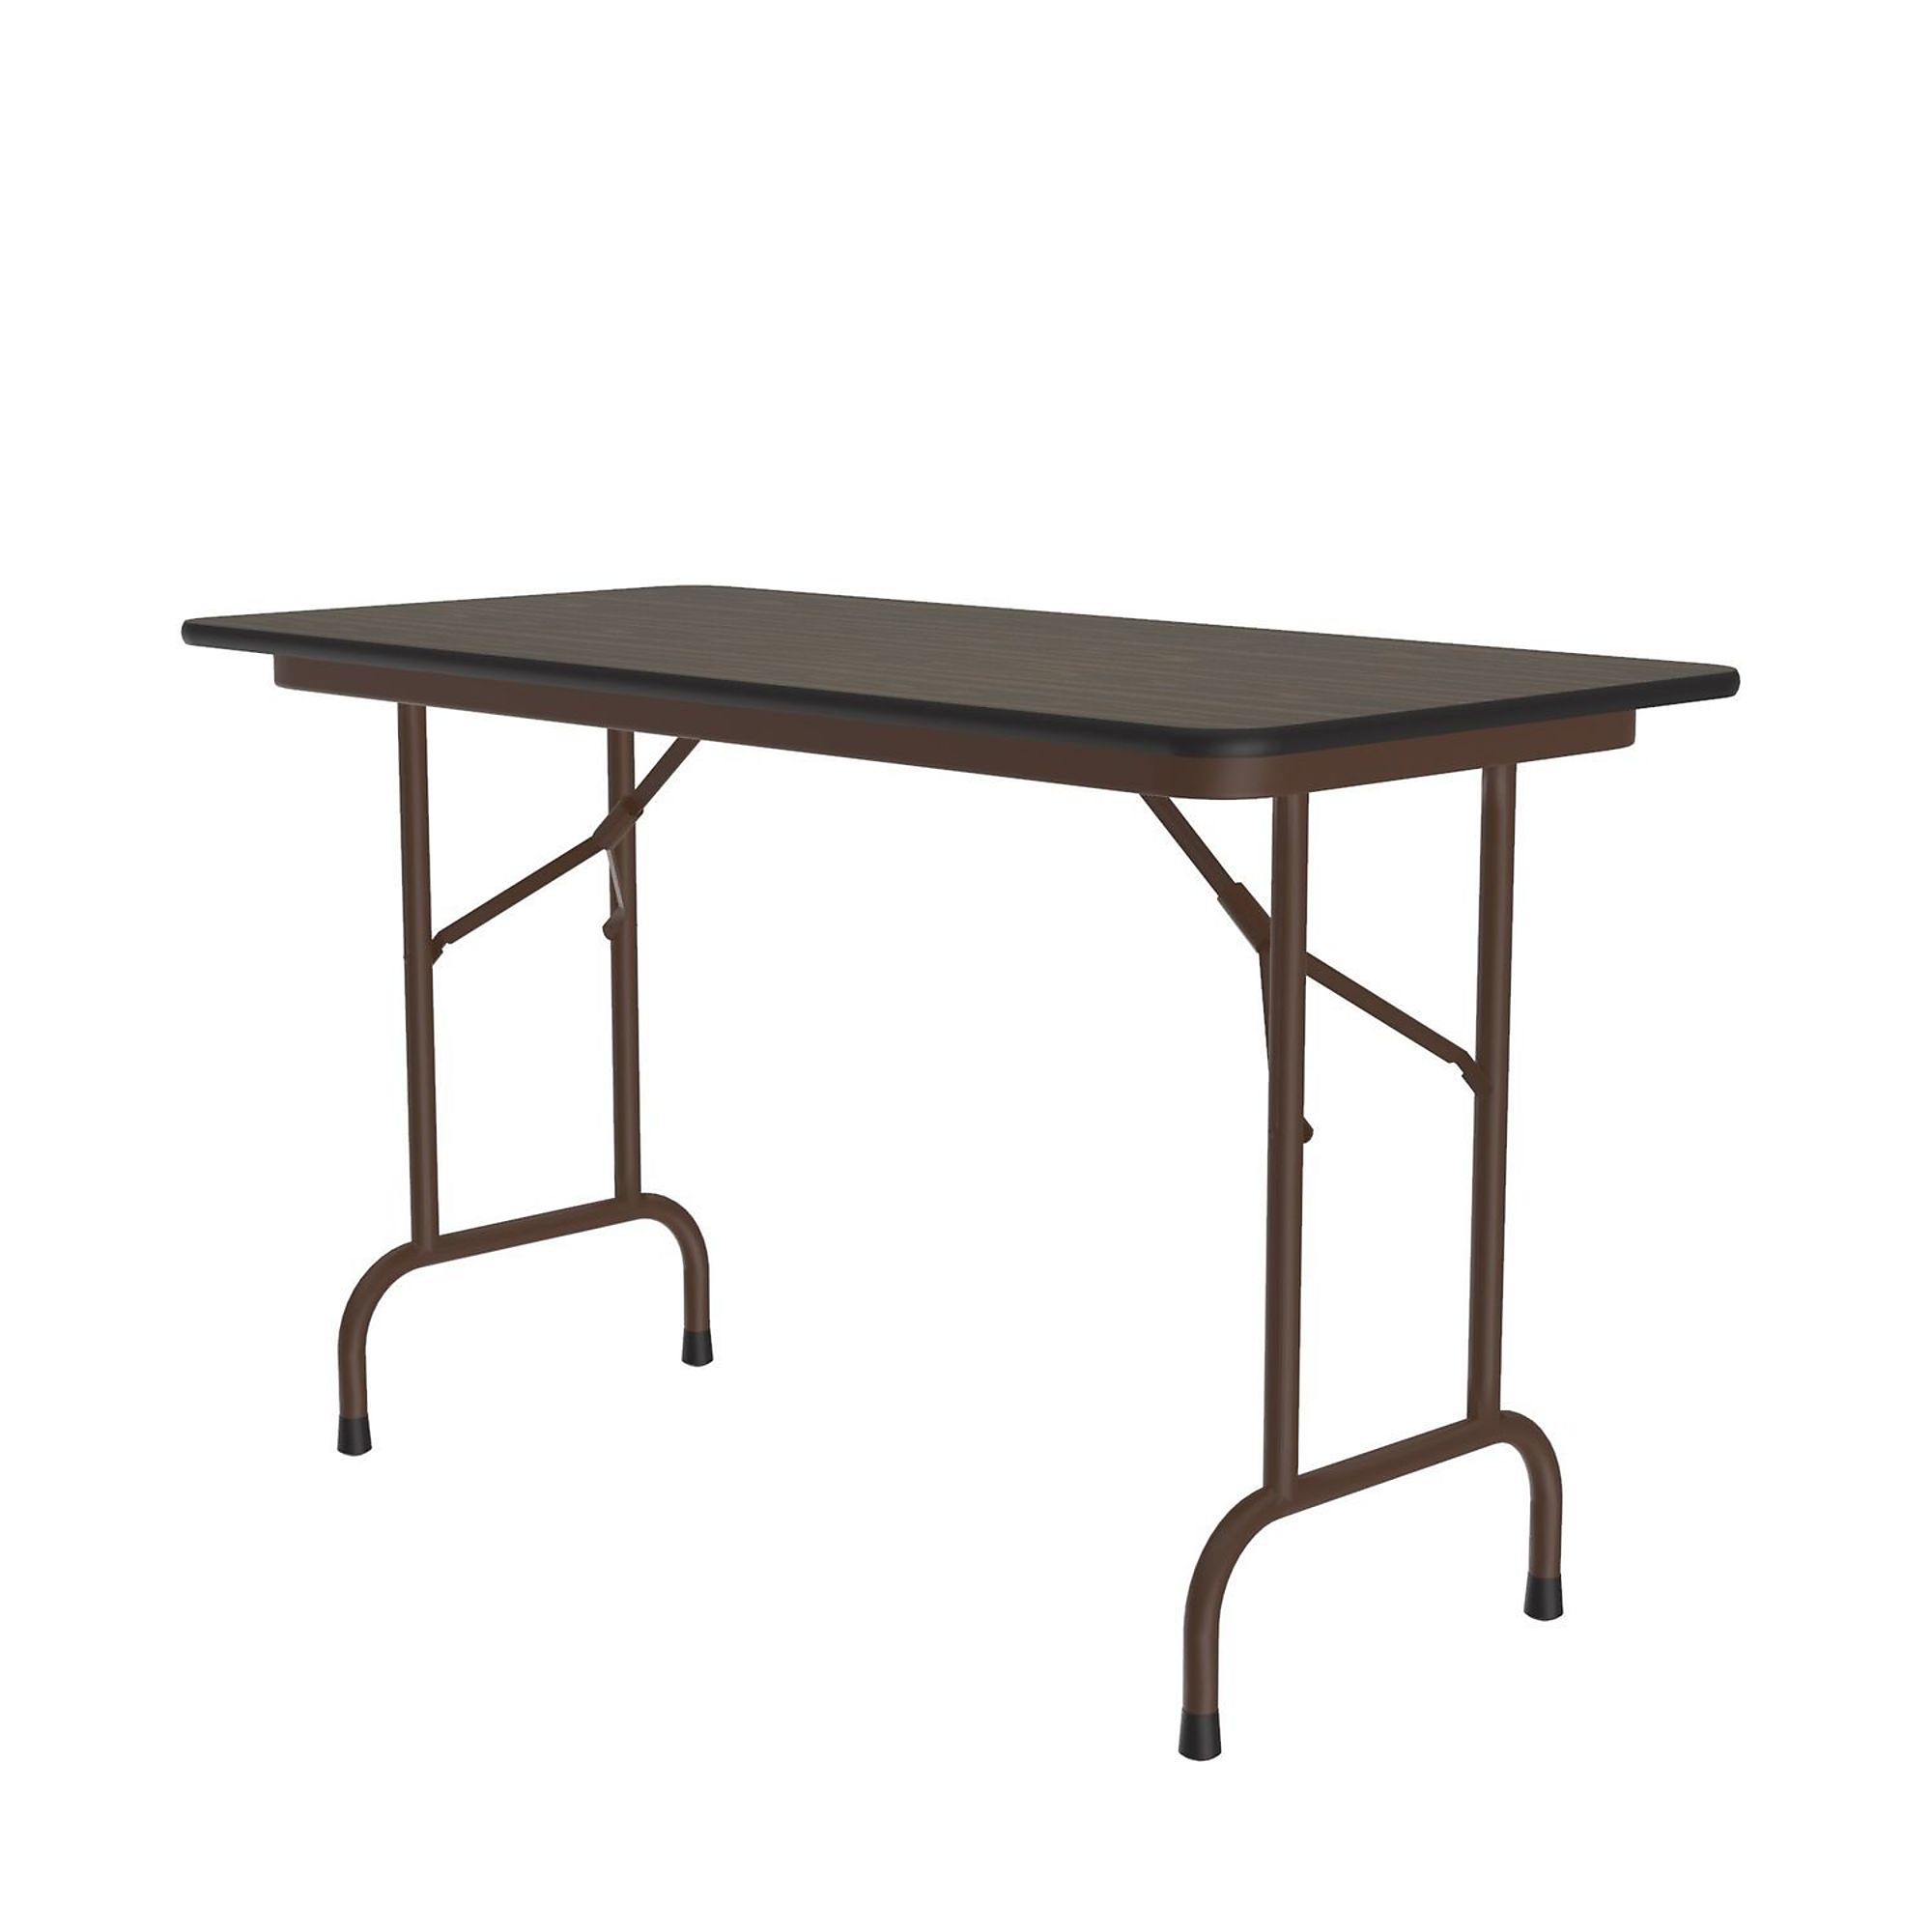 Correll, Commercial TFL Folding Table, Walnut, 24x48, Height 29 in, Width 24 in, Length 48 in, Model CF2448TF-01